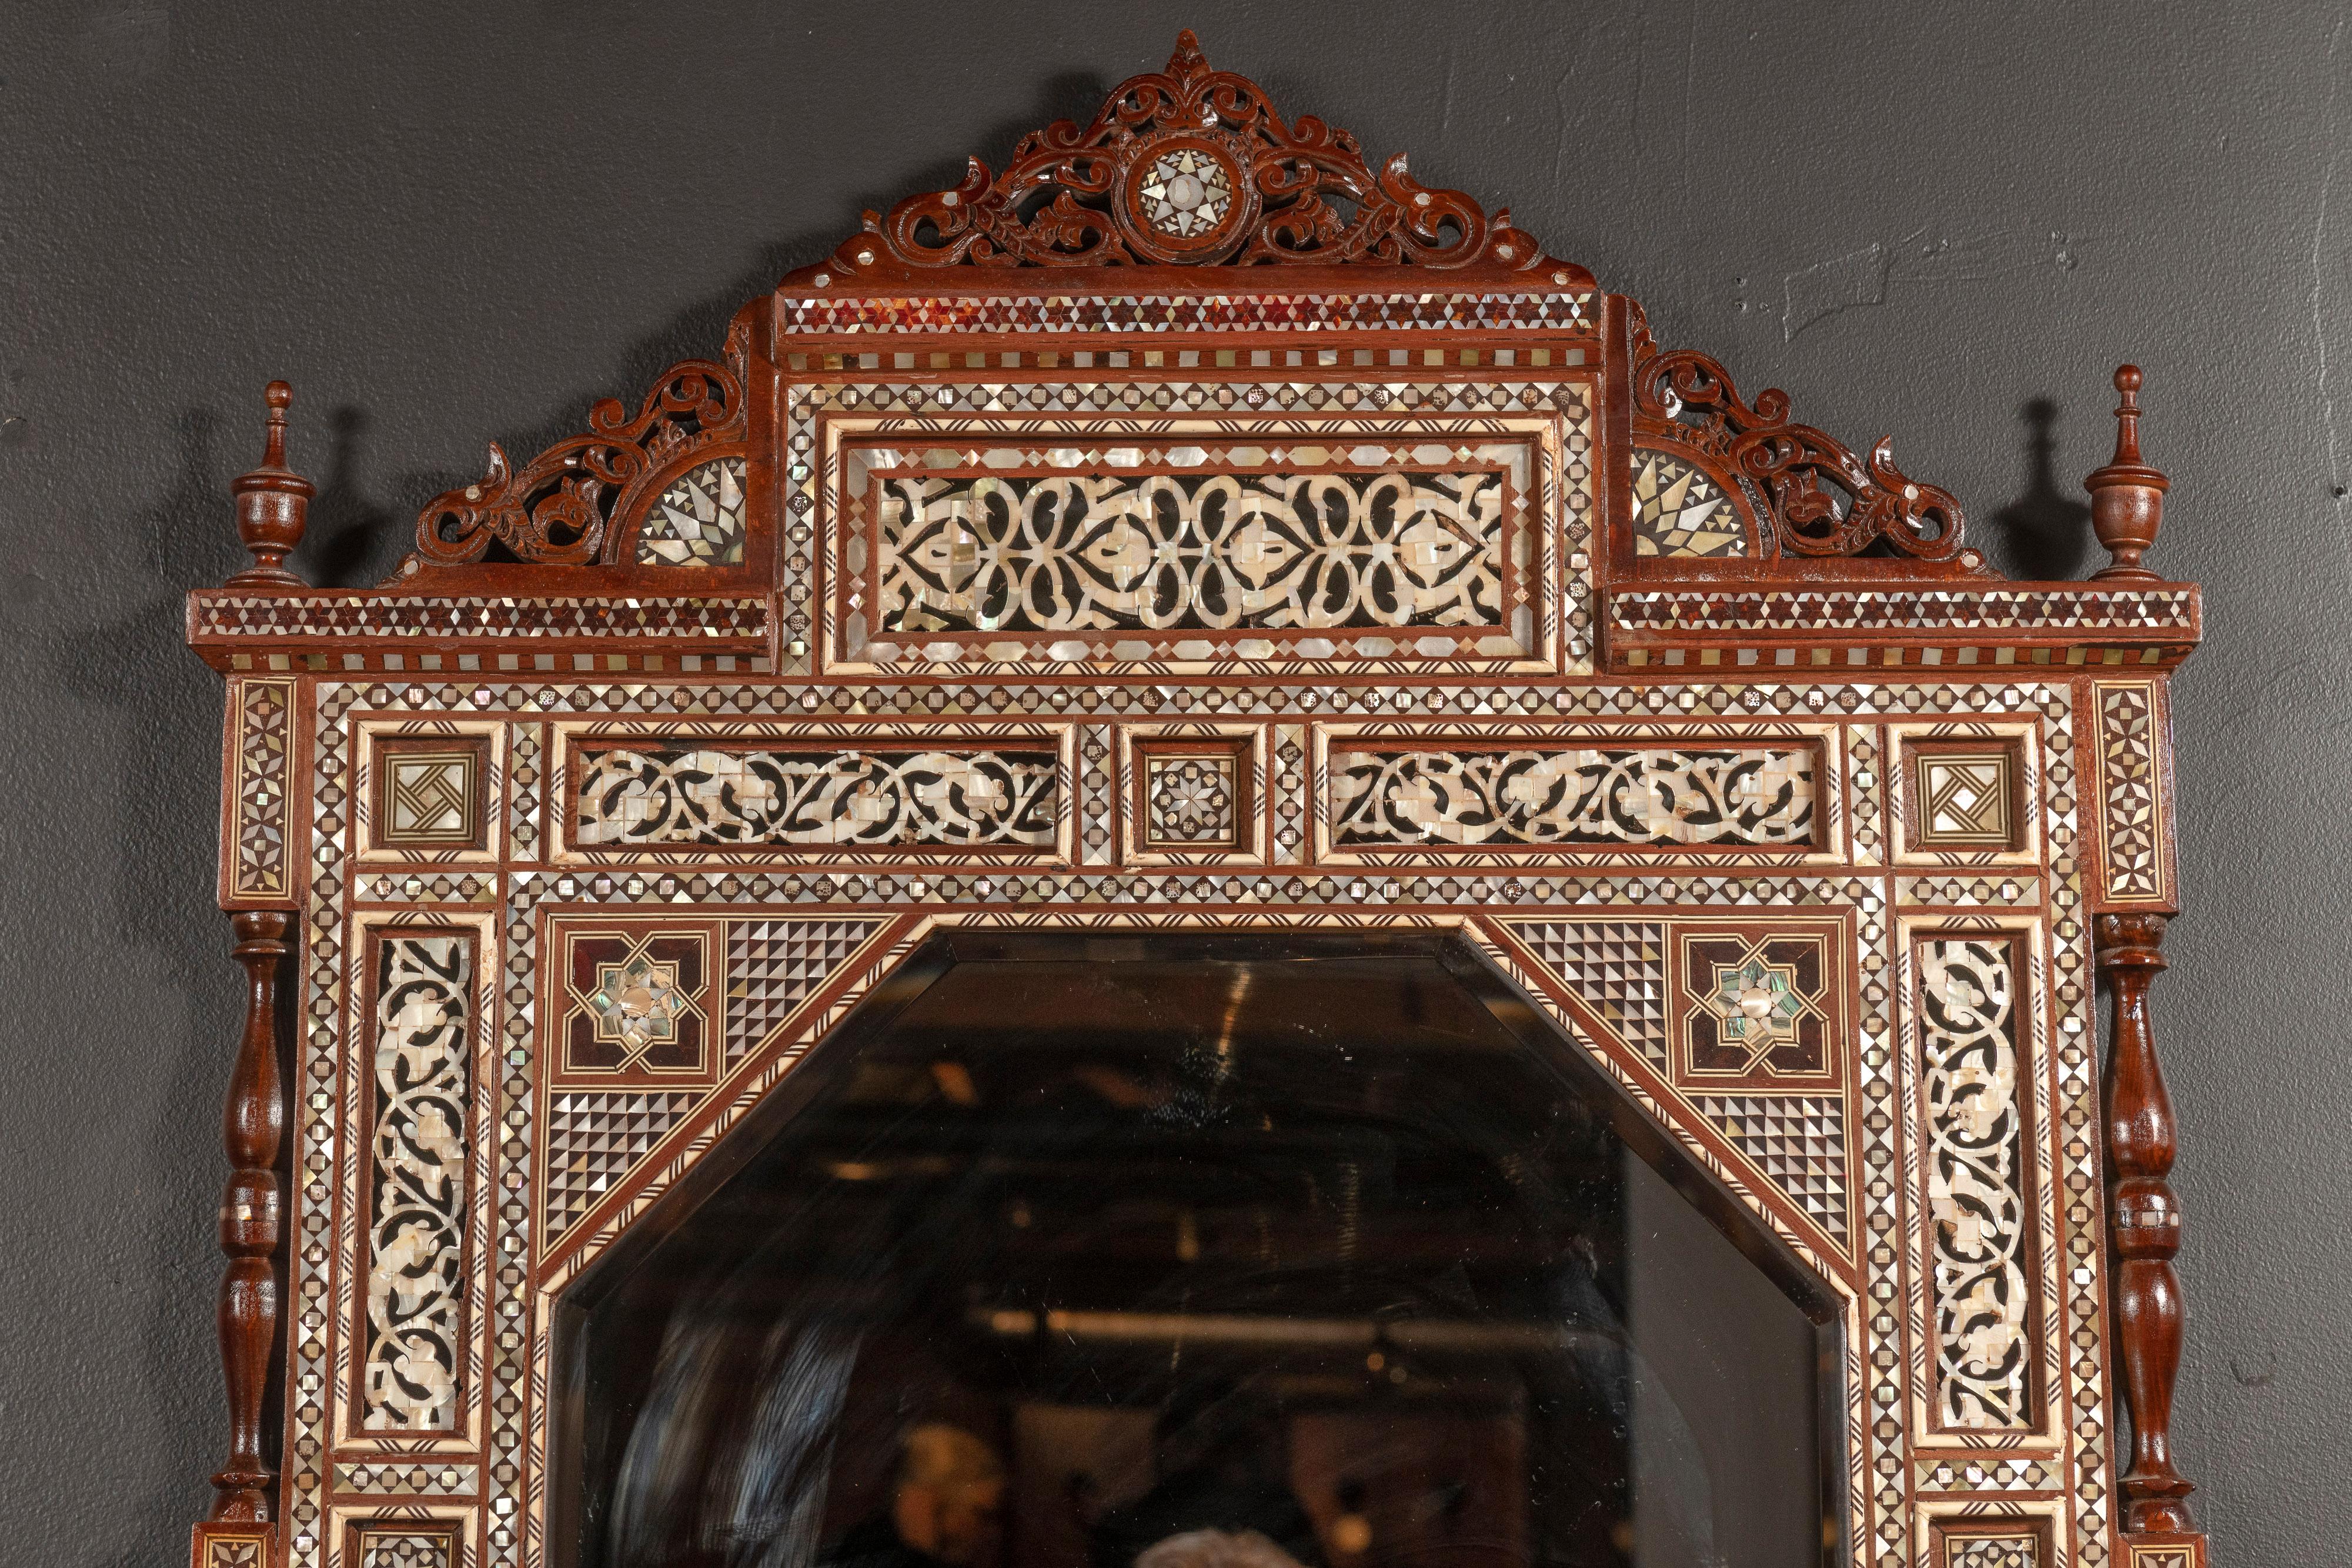 Two Unique Syrian Mirrors with Mother of Pearl Inlay and Wooden Marquetry  For Sale 5